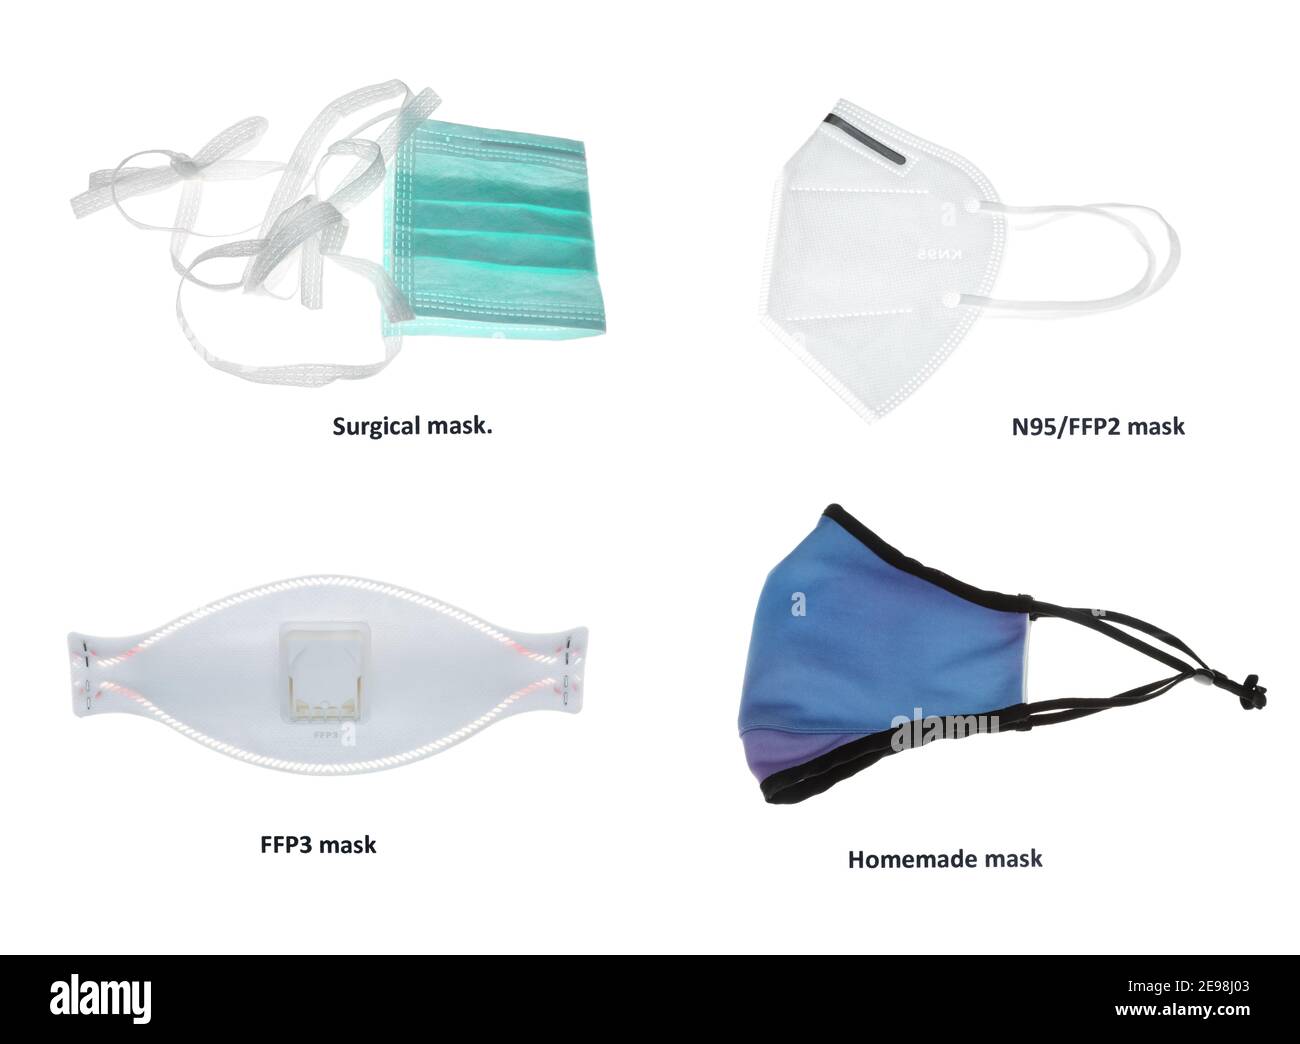 Four masks offering different grades of protection against Covid-19 infection, homemade fabric face covering, surgical mask, N95, FFP2 and FFP3 mask. Stock Photo